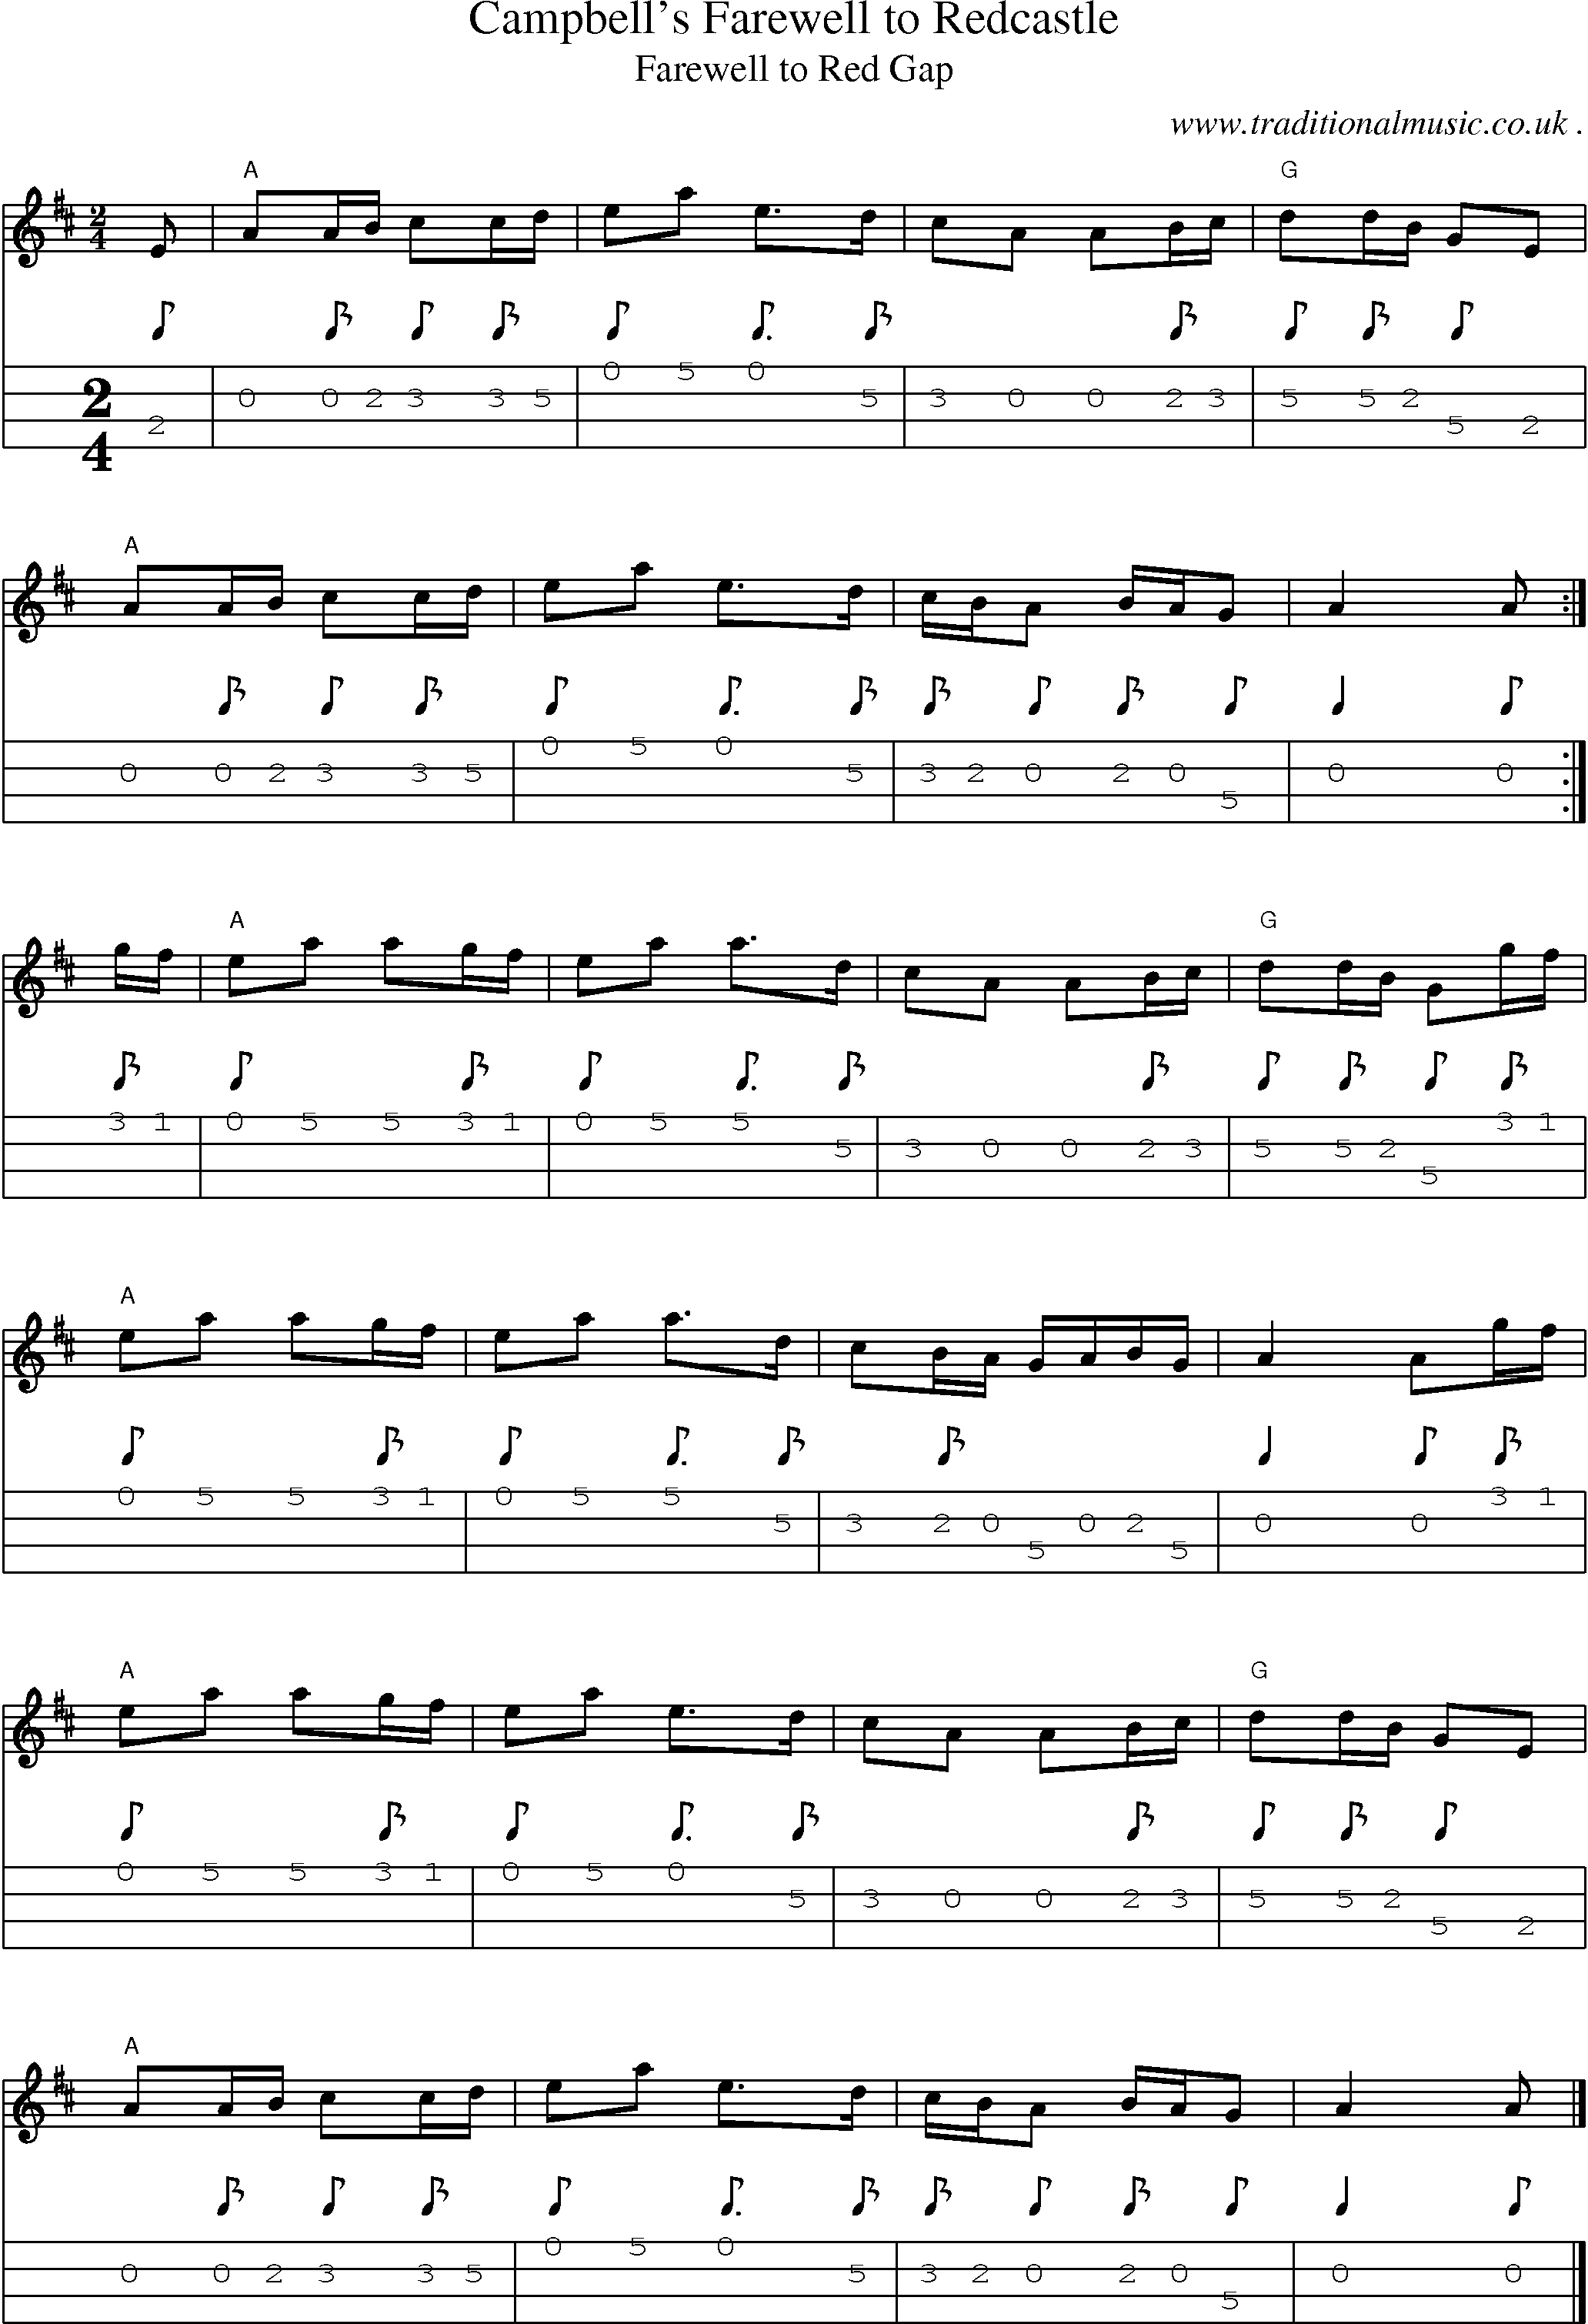 Music Score and Guitar Tabs for Campbells Farewell to Redcastle1